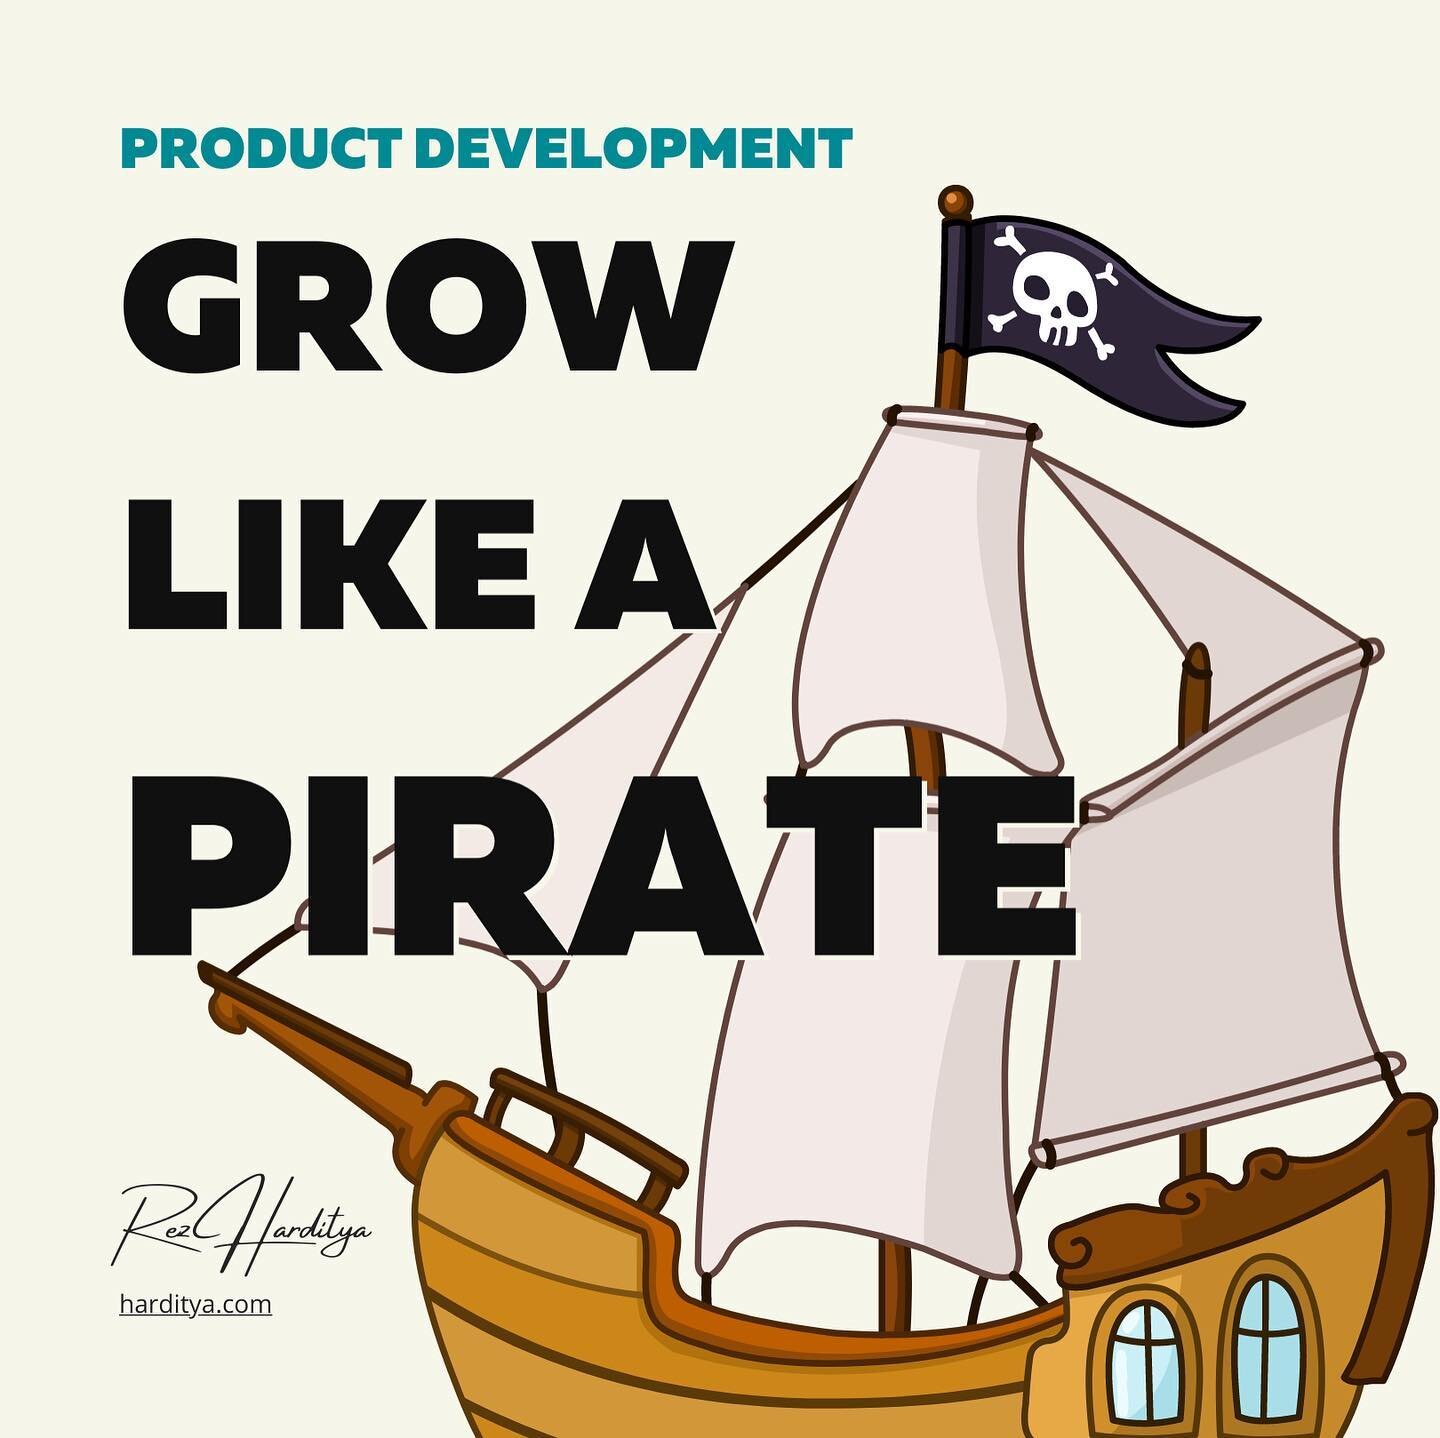 Growing your product? Here&rsquo;s how a pirate would do it 🏴&zwj;☠️

&mdash;&mdash;
#agilecoaching #productdevelopment #growthhacking #productgrowth